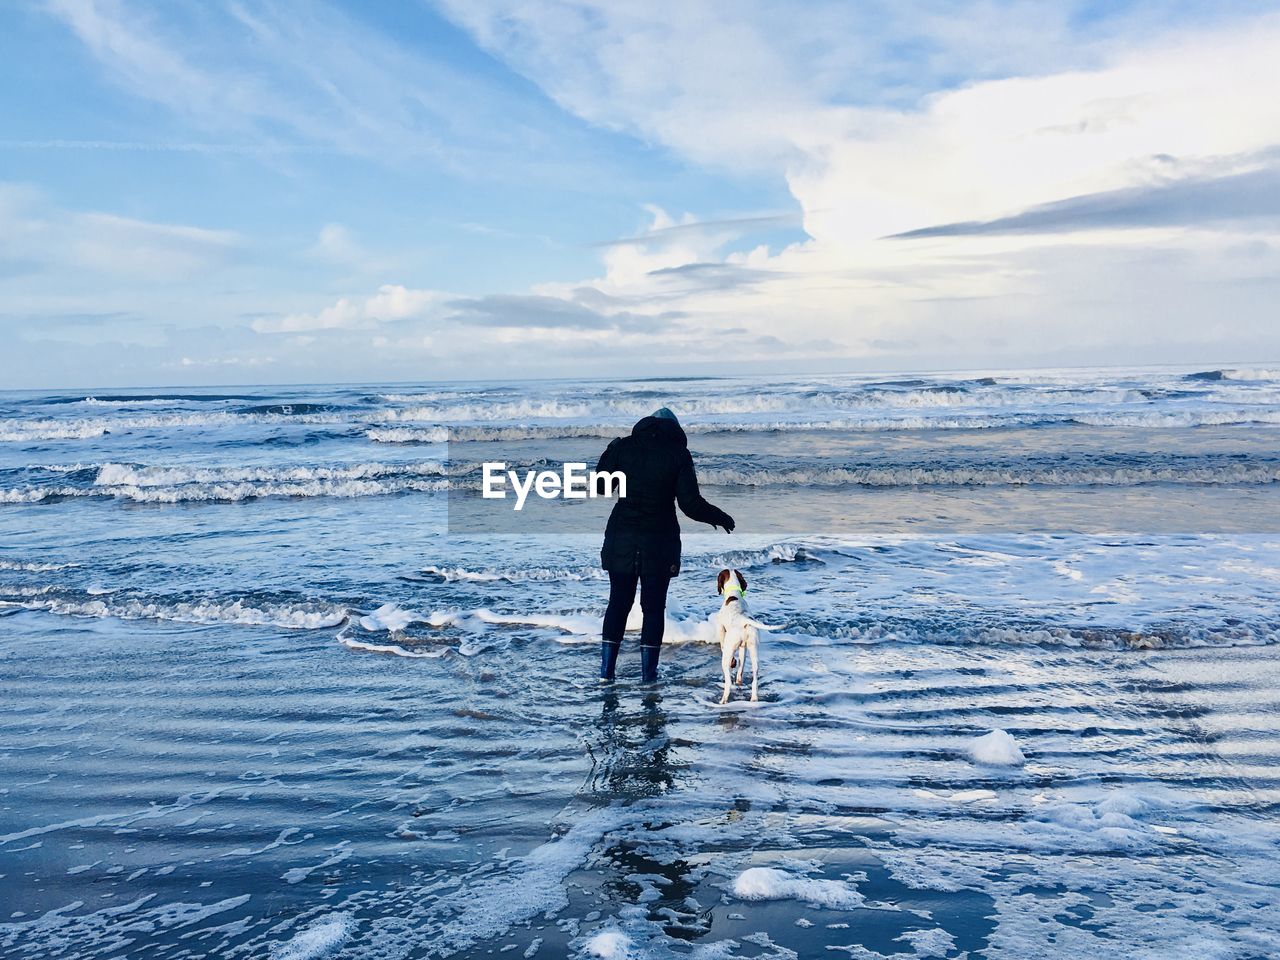 Woman with dog wading in frozen sea against sky